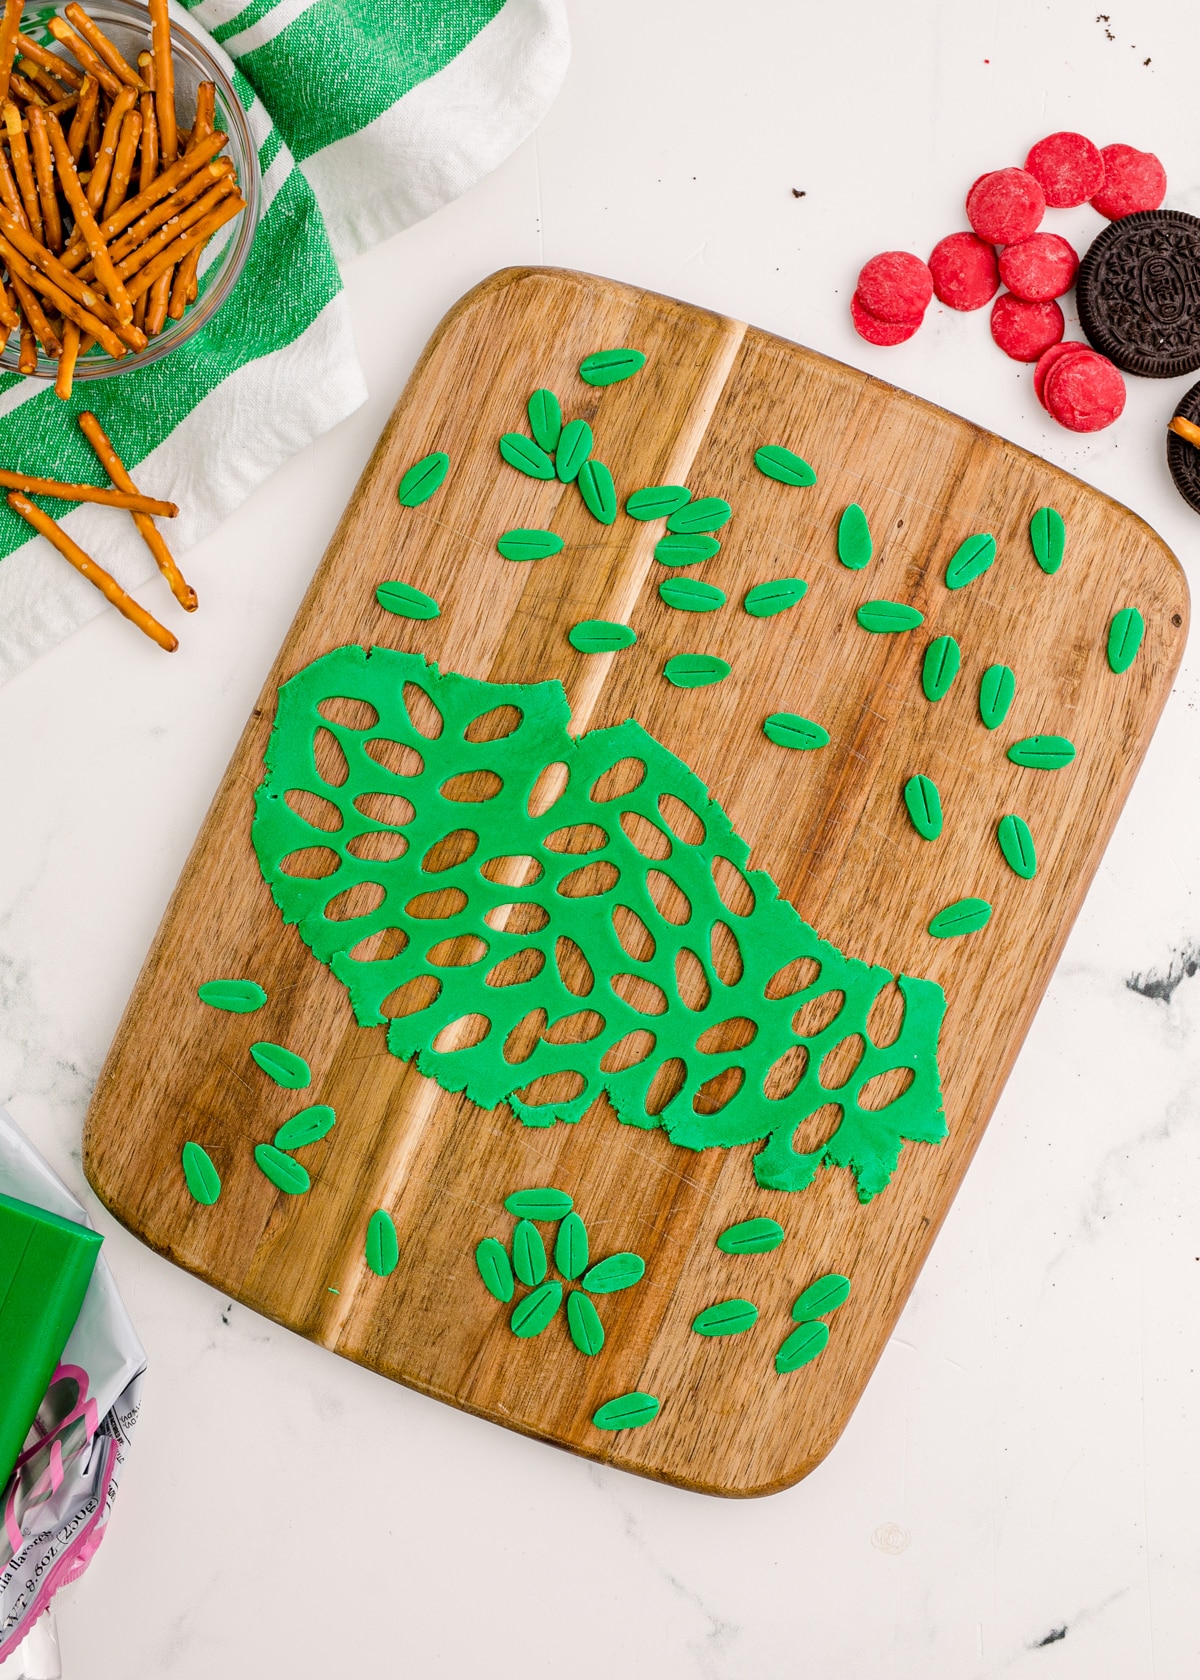 Green leaves cut out of fondant on a cutting board.